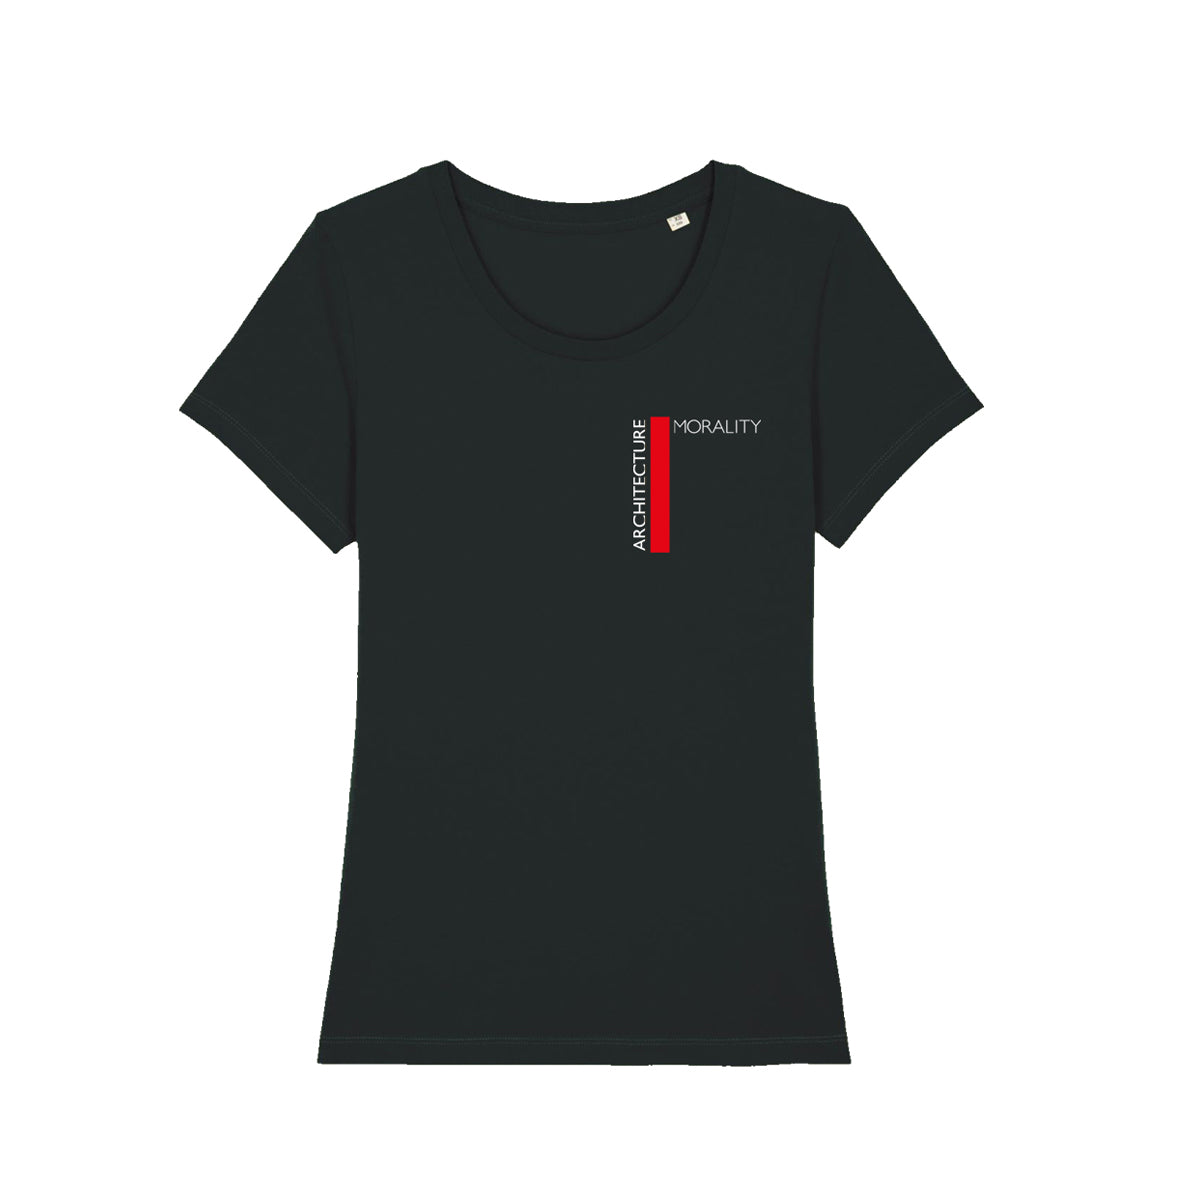 Architecture & Morality - T-shirt (Men's) | OMD Official Store